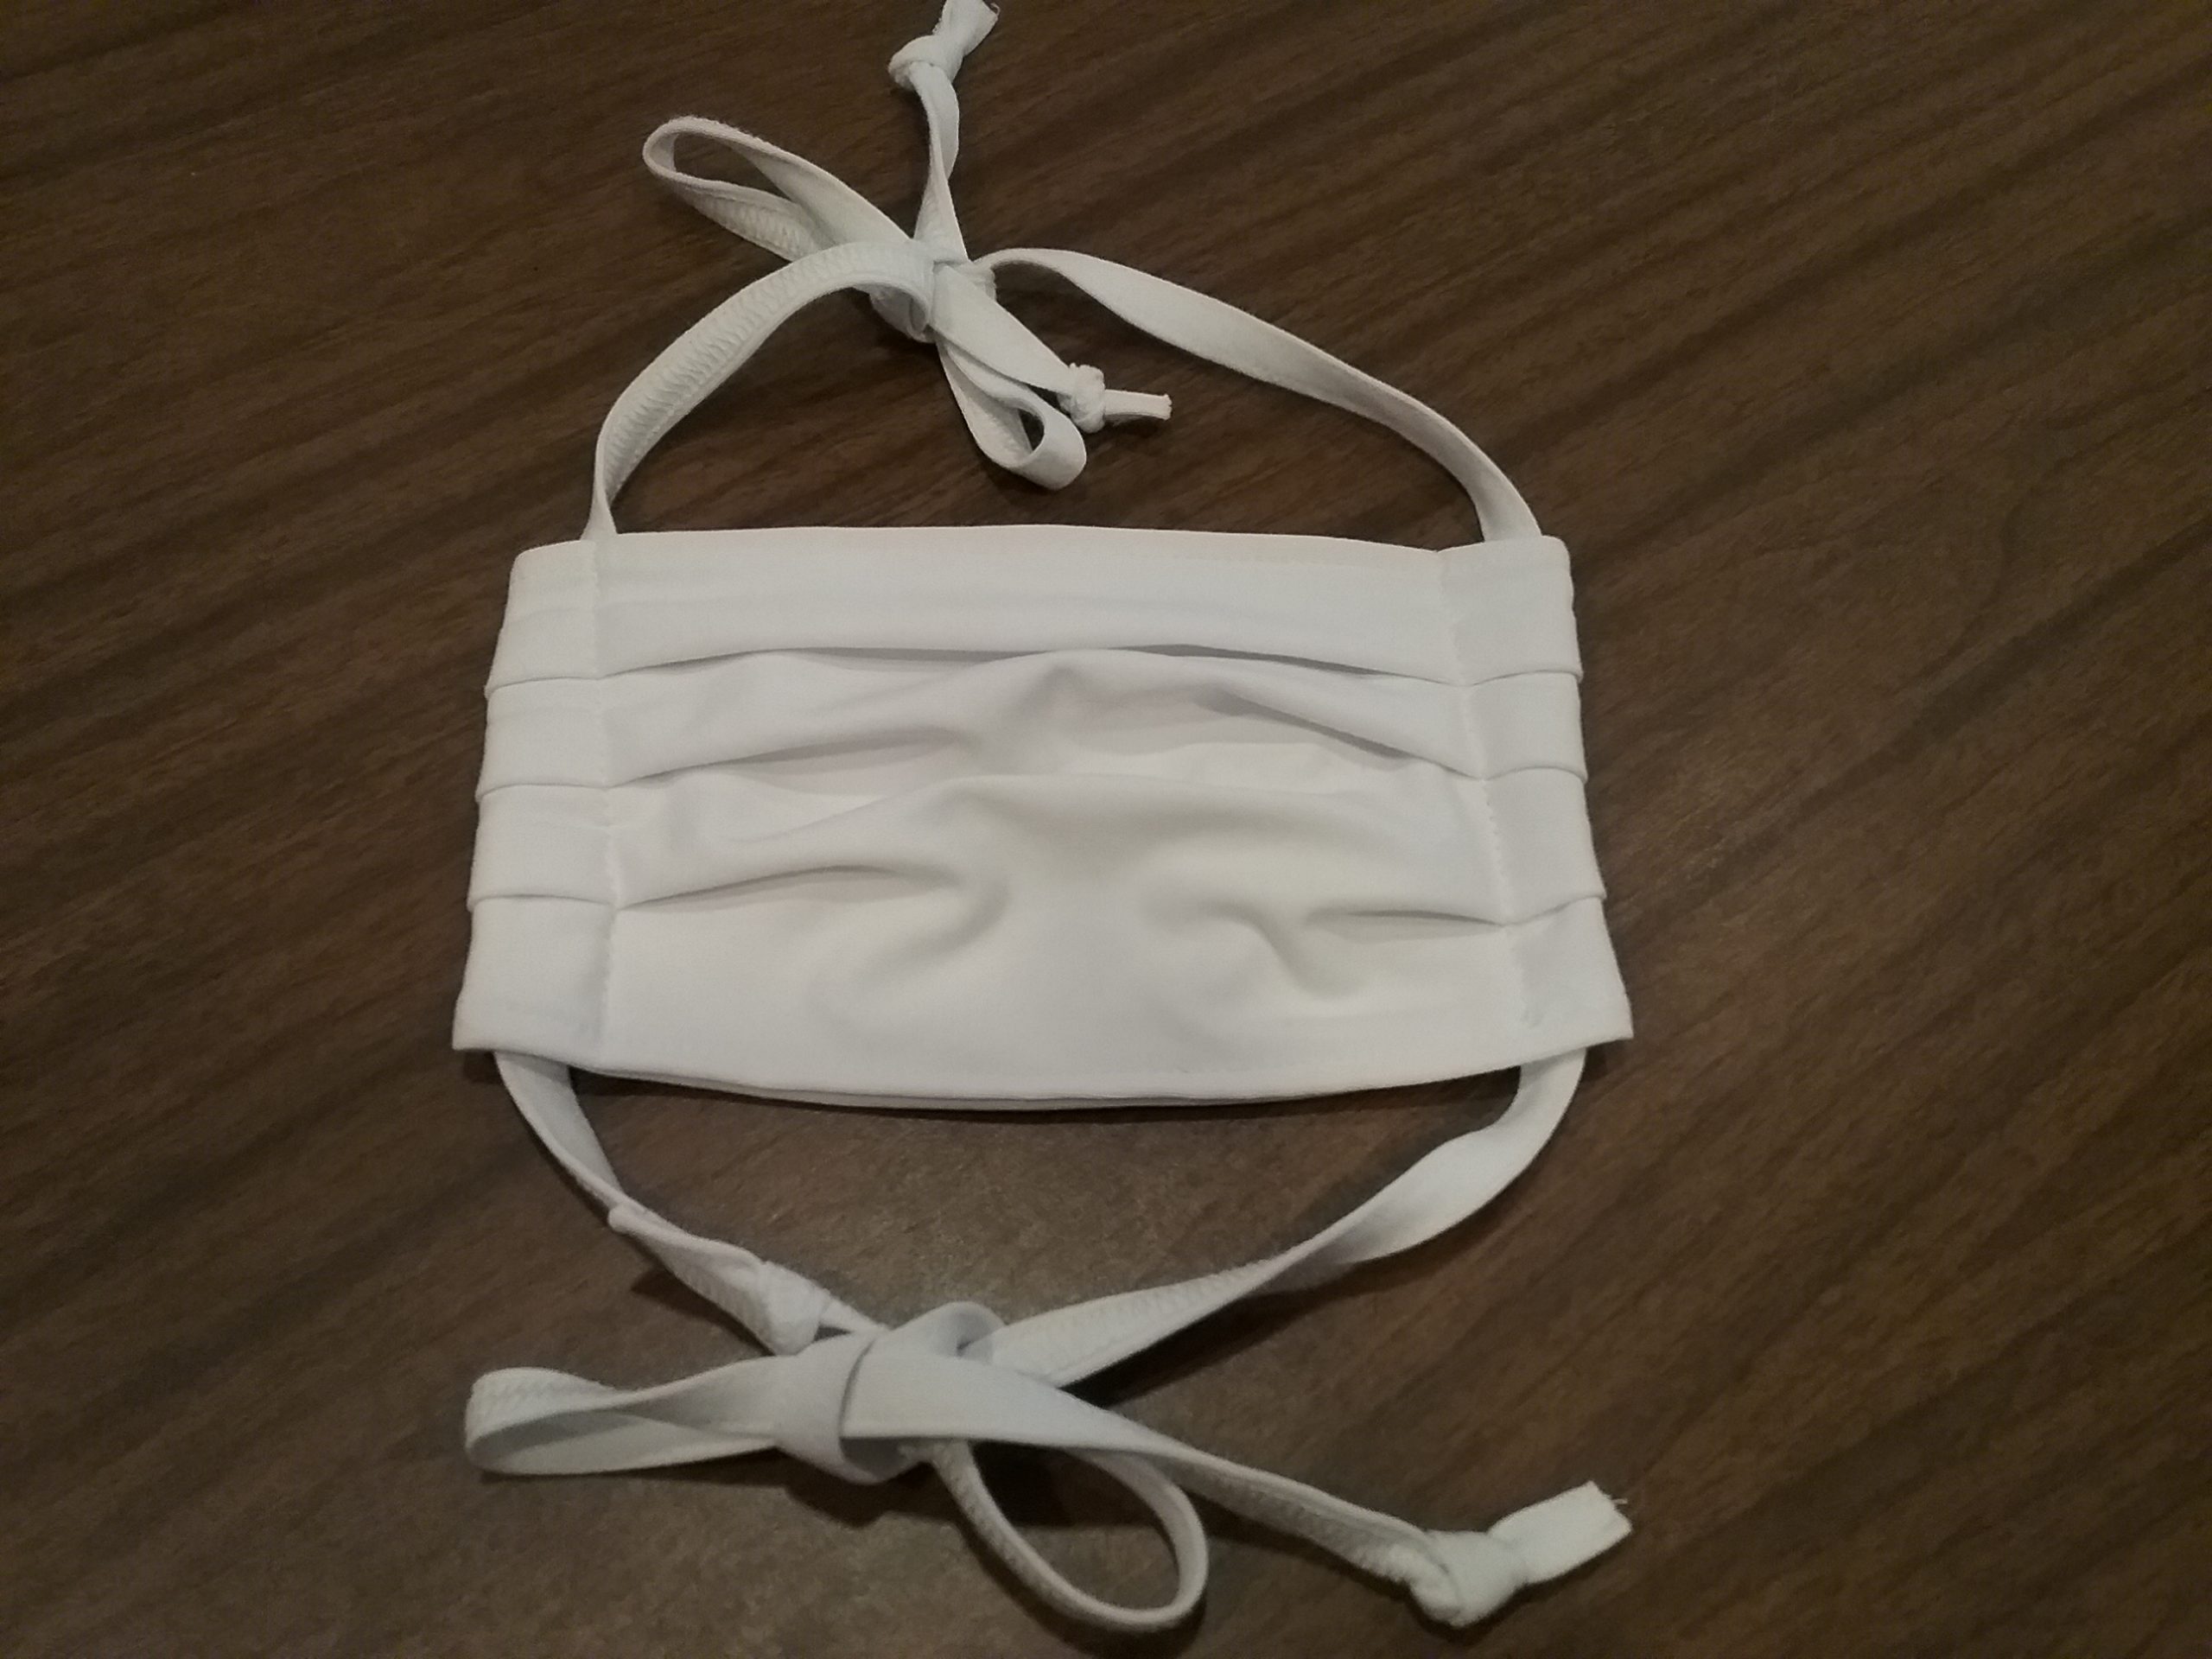 White, pleated cloth mask for COVID-19 pandemic, January 2021.